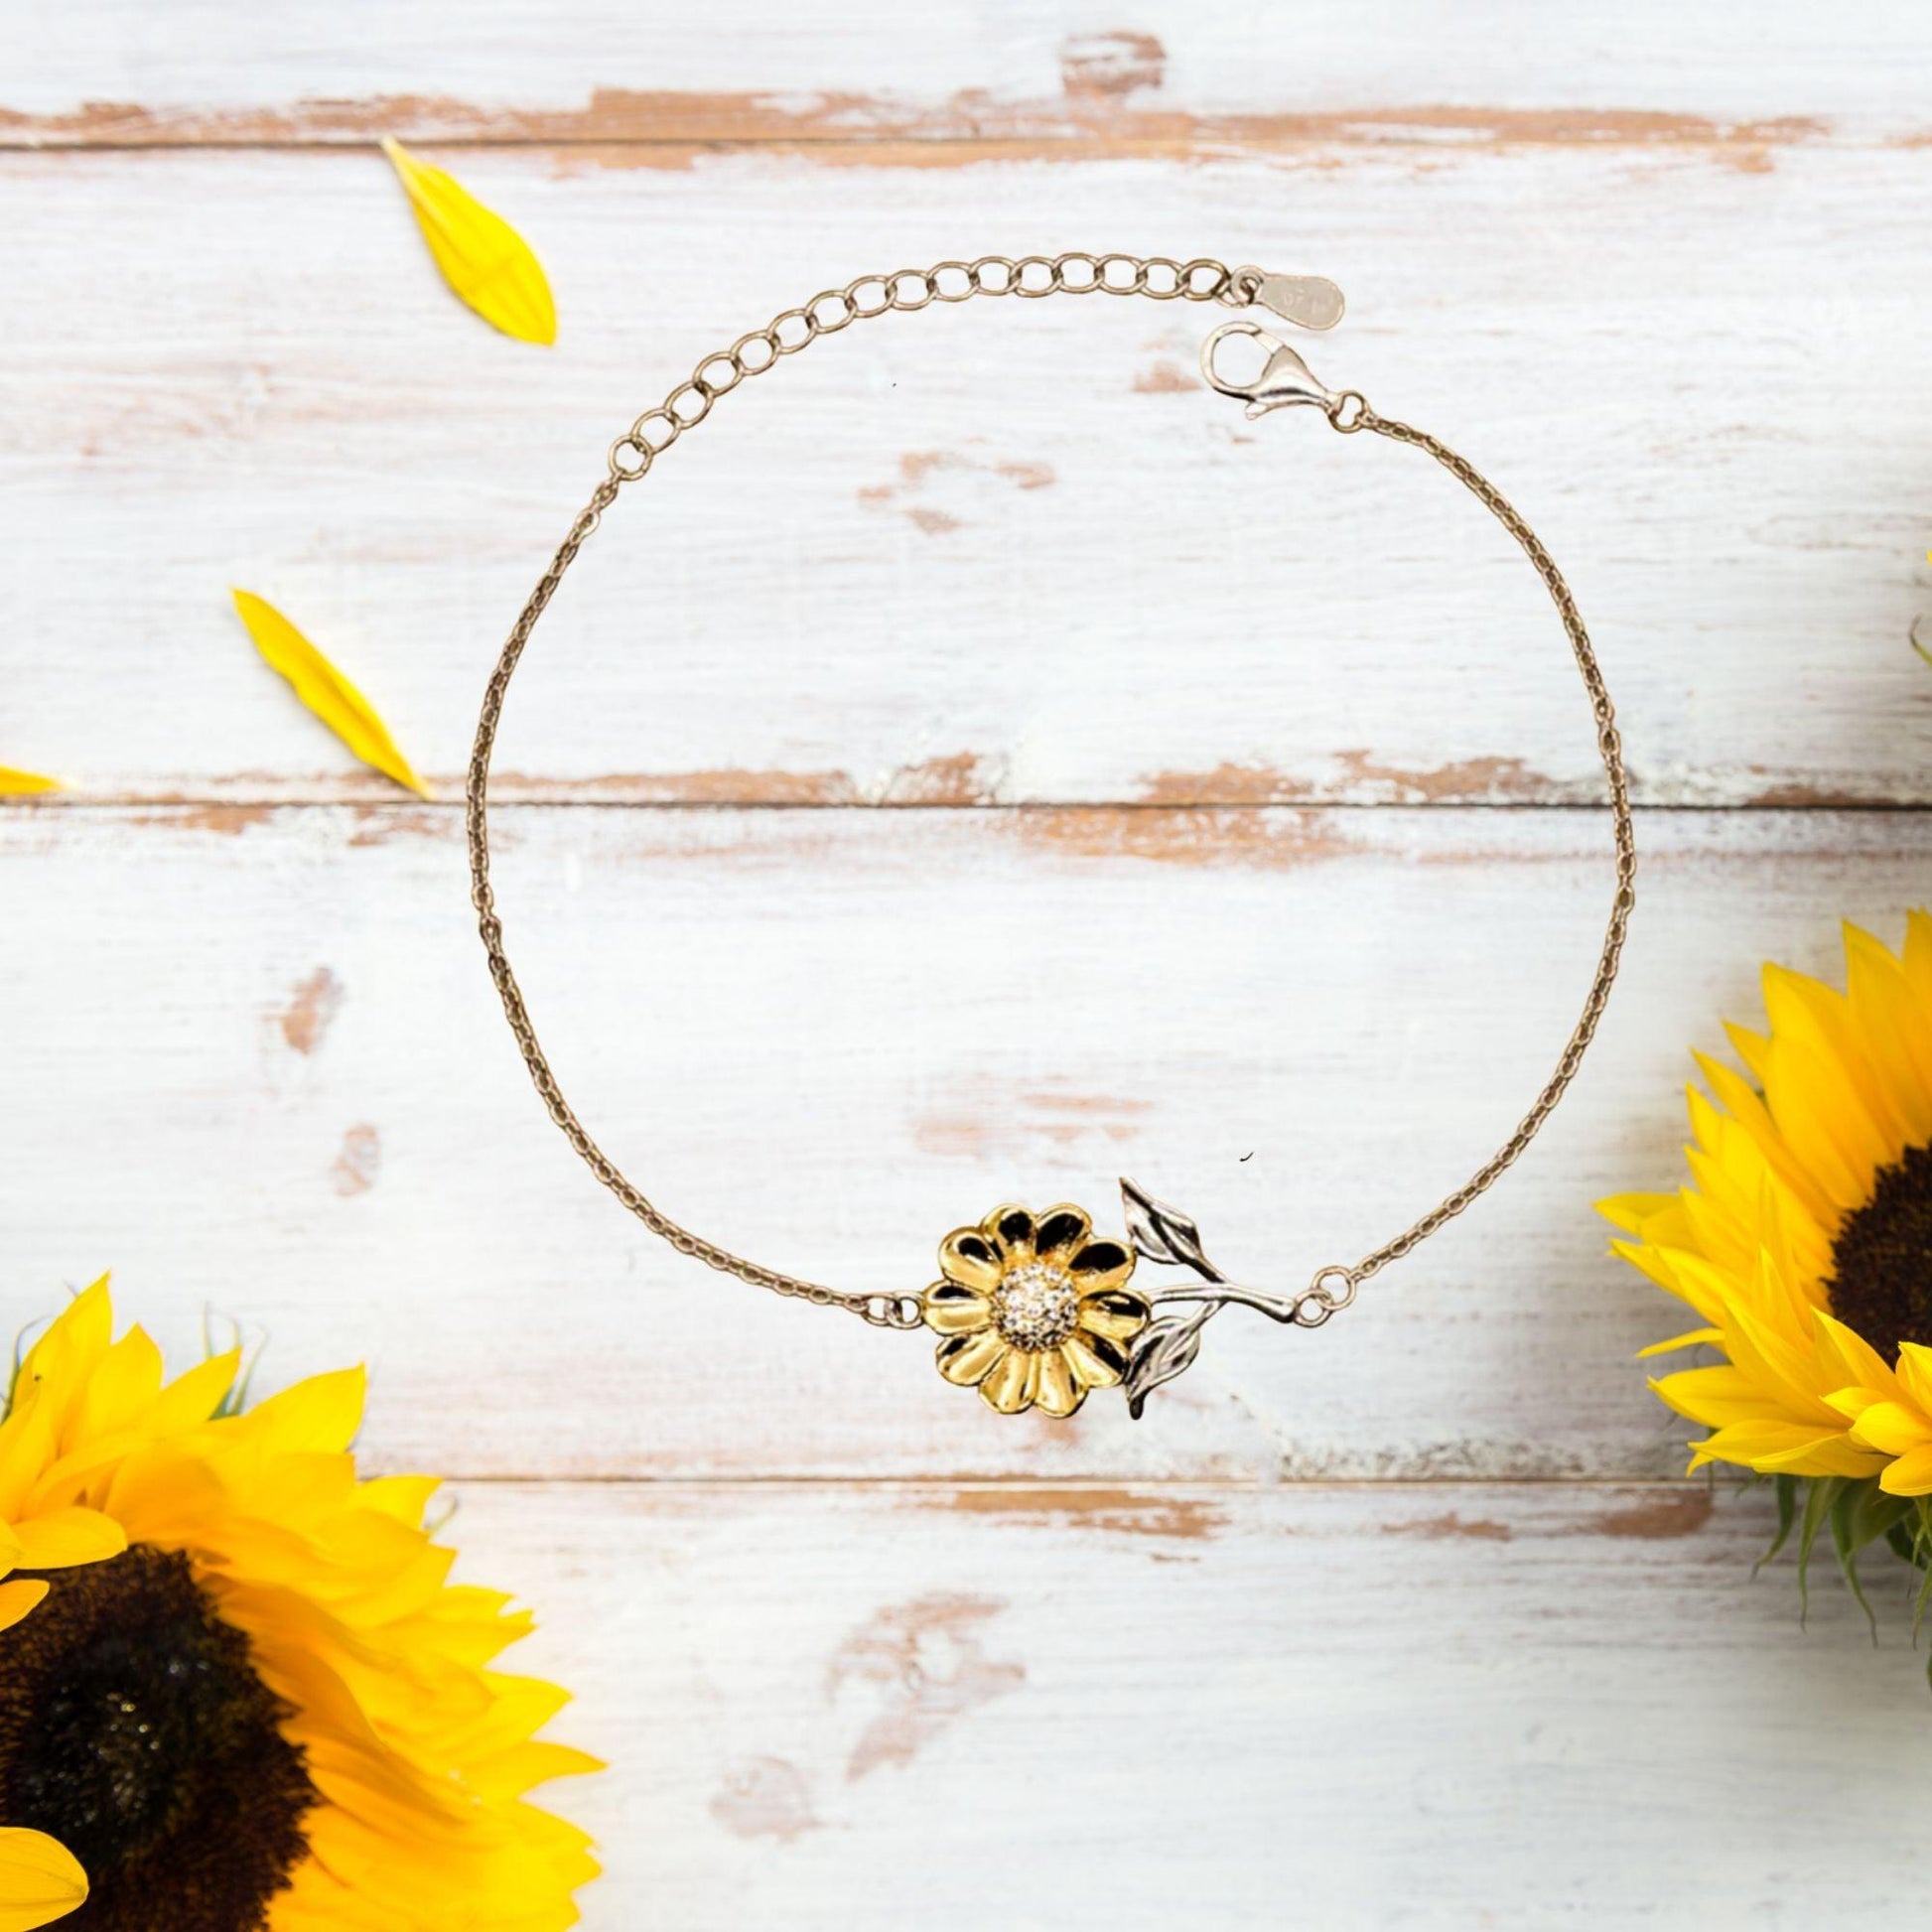 Maryland is my home Gifts, Lovely Maryland Birthday Christmas Sunflower Bracelet For People from Maryland, Men, Women, Friends - Mallard Moon Gift Shop